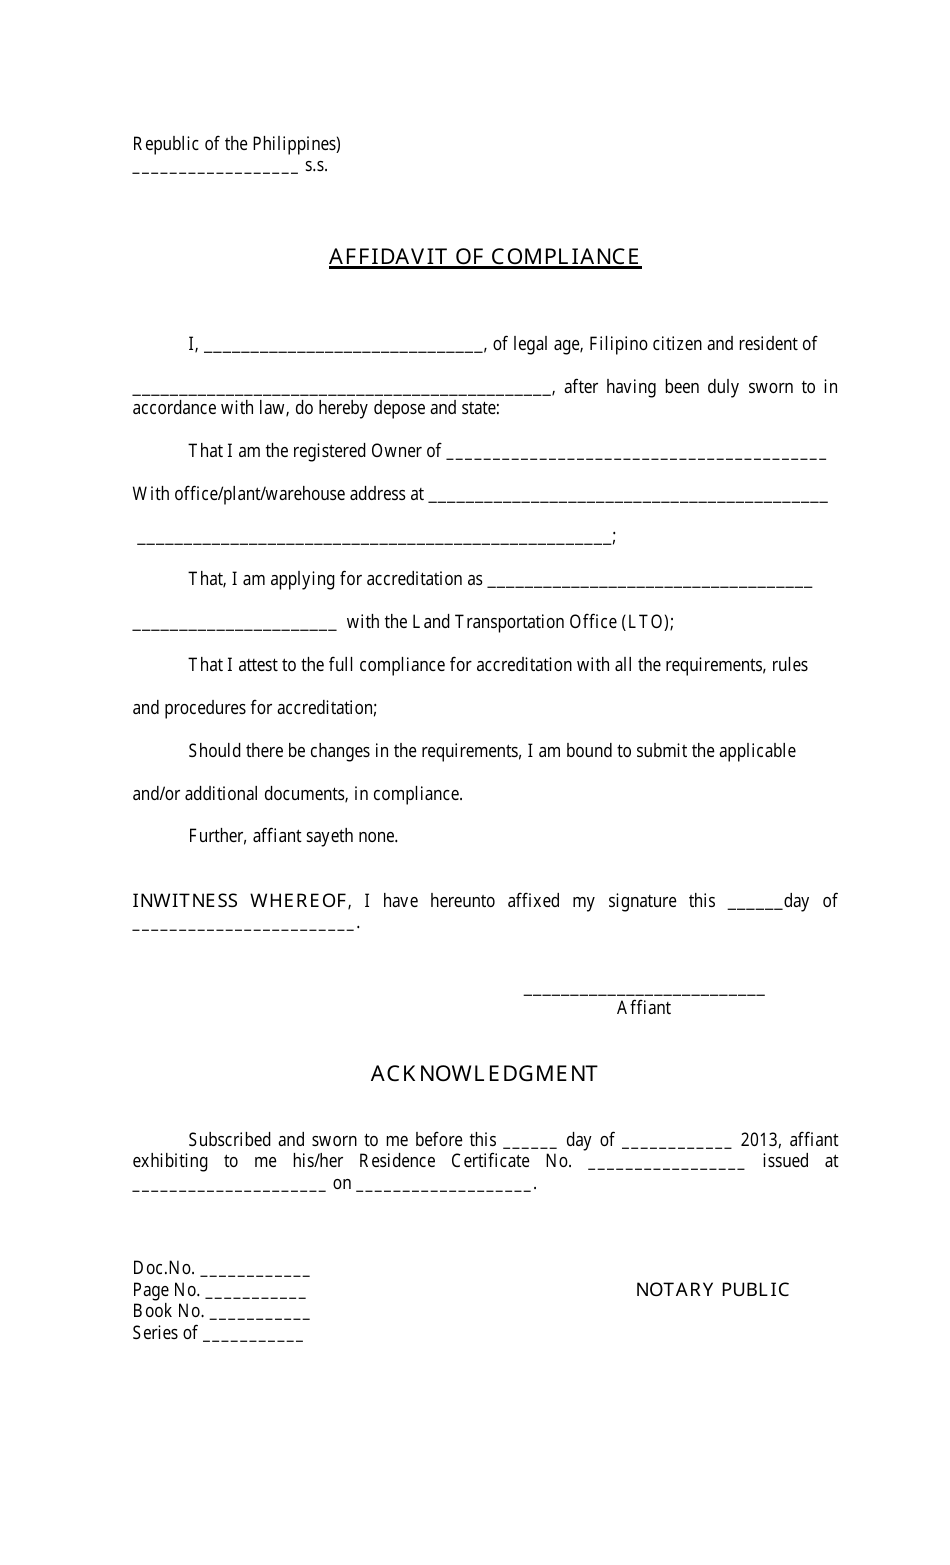 Affidavit of Compliance Form - Philippines, Page 1